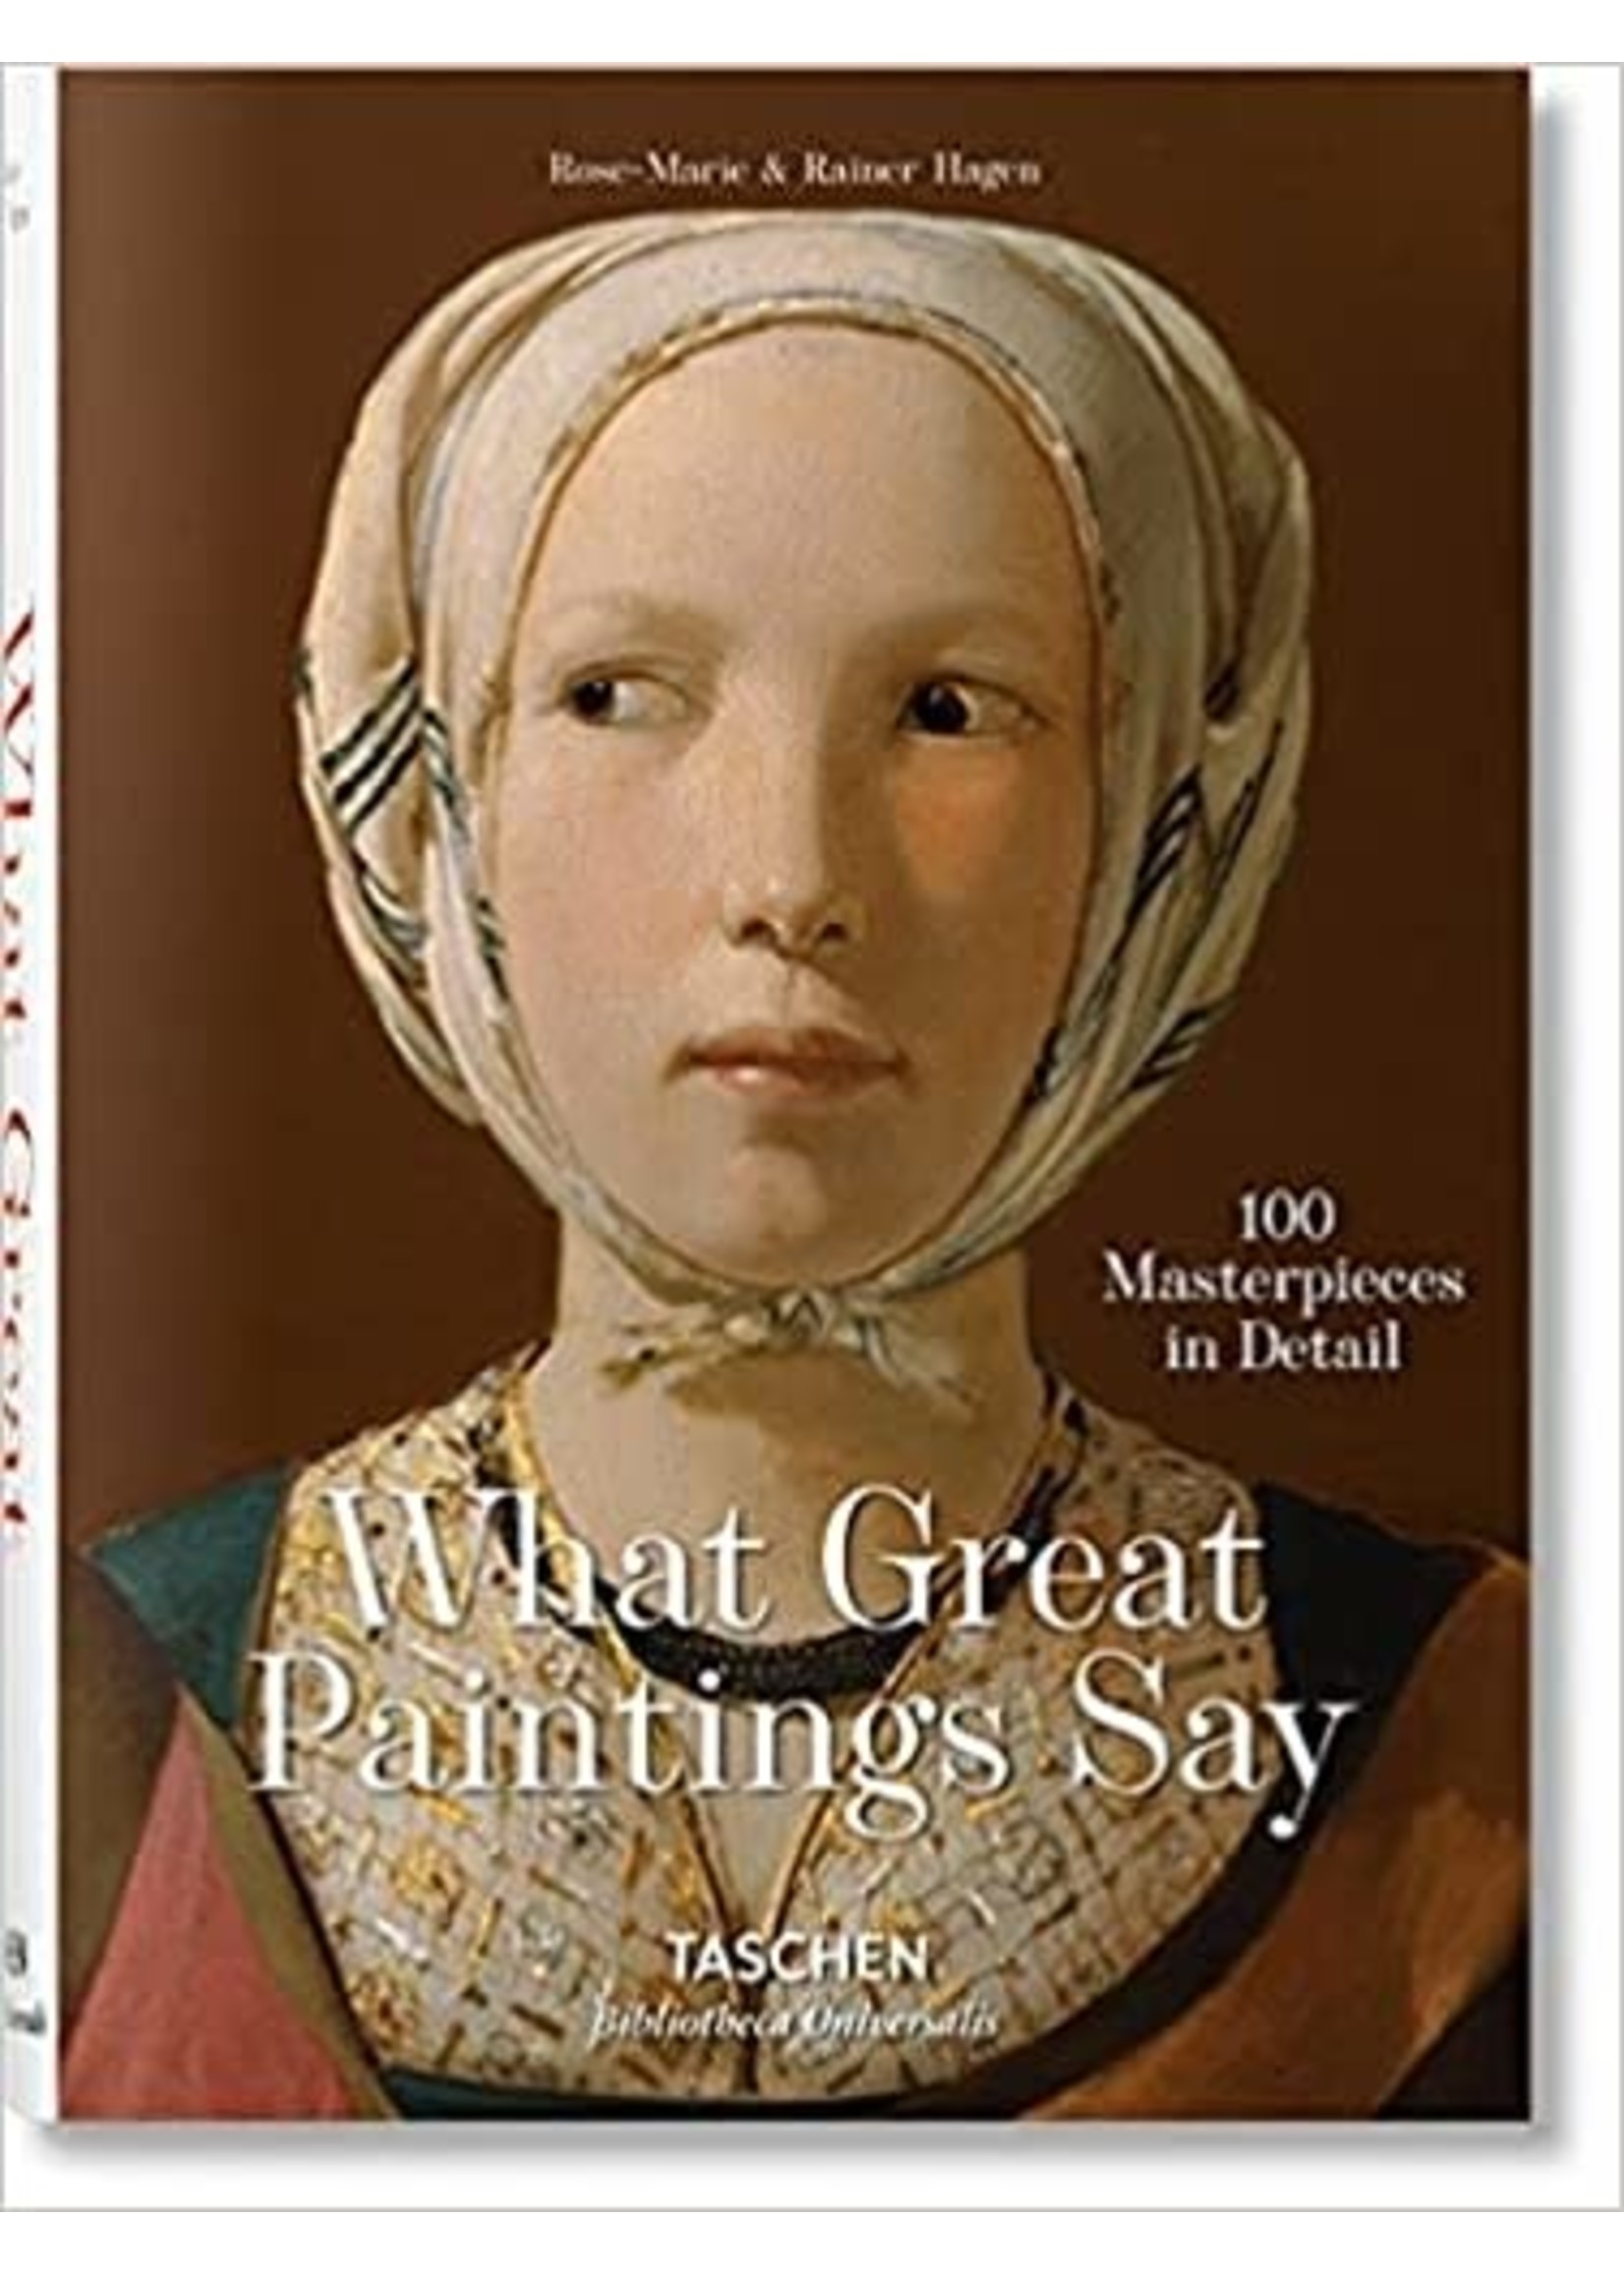 Book - What Great Paintings Say - 100 Masterpieces